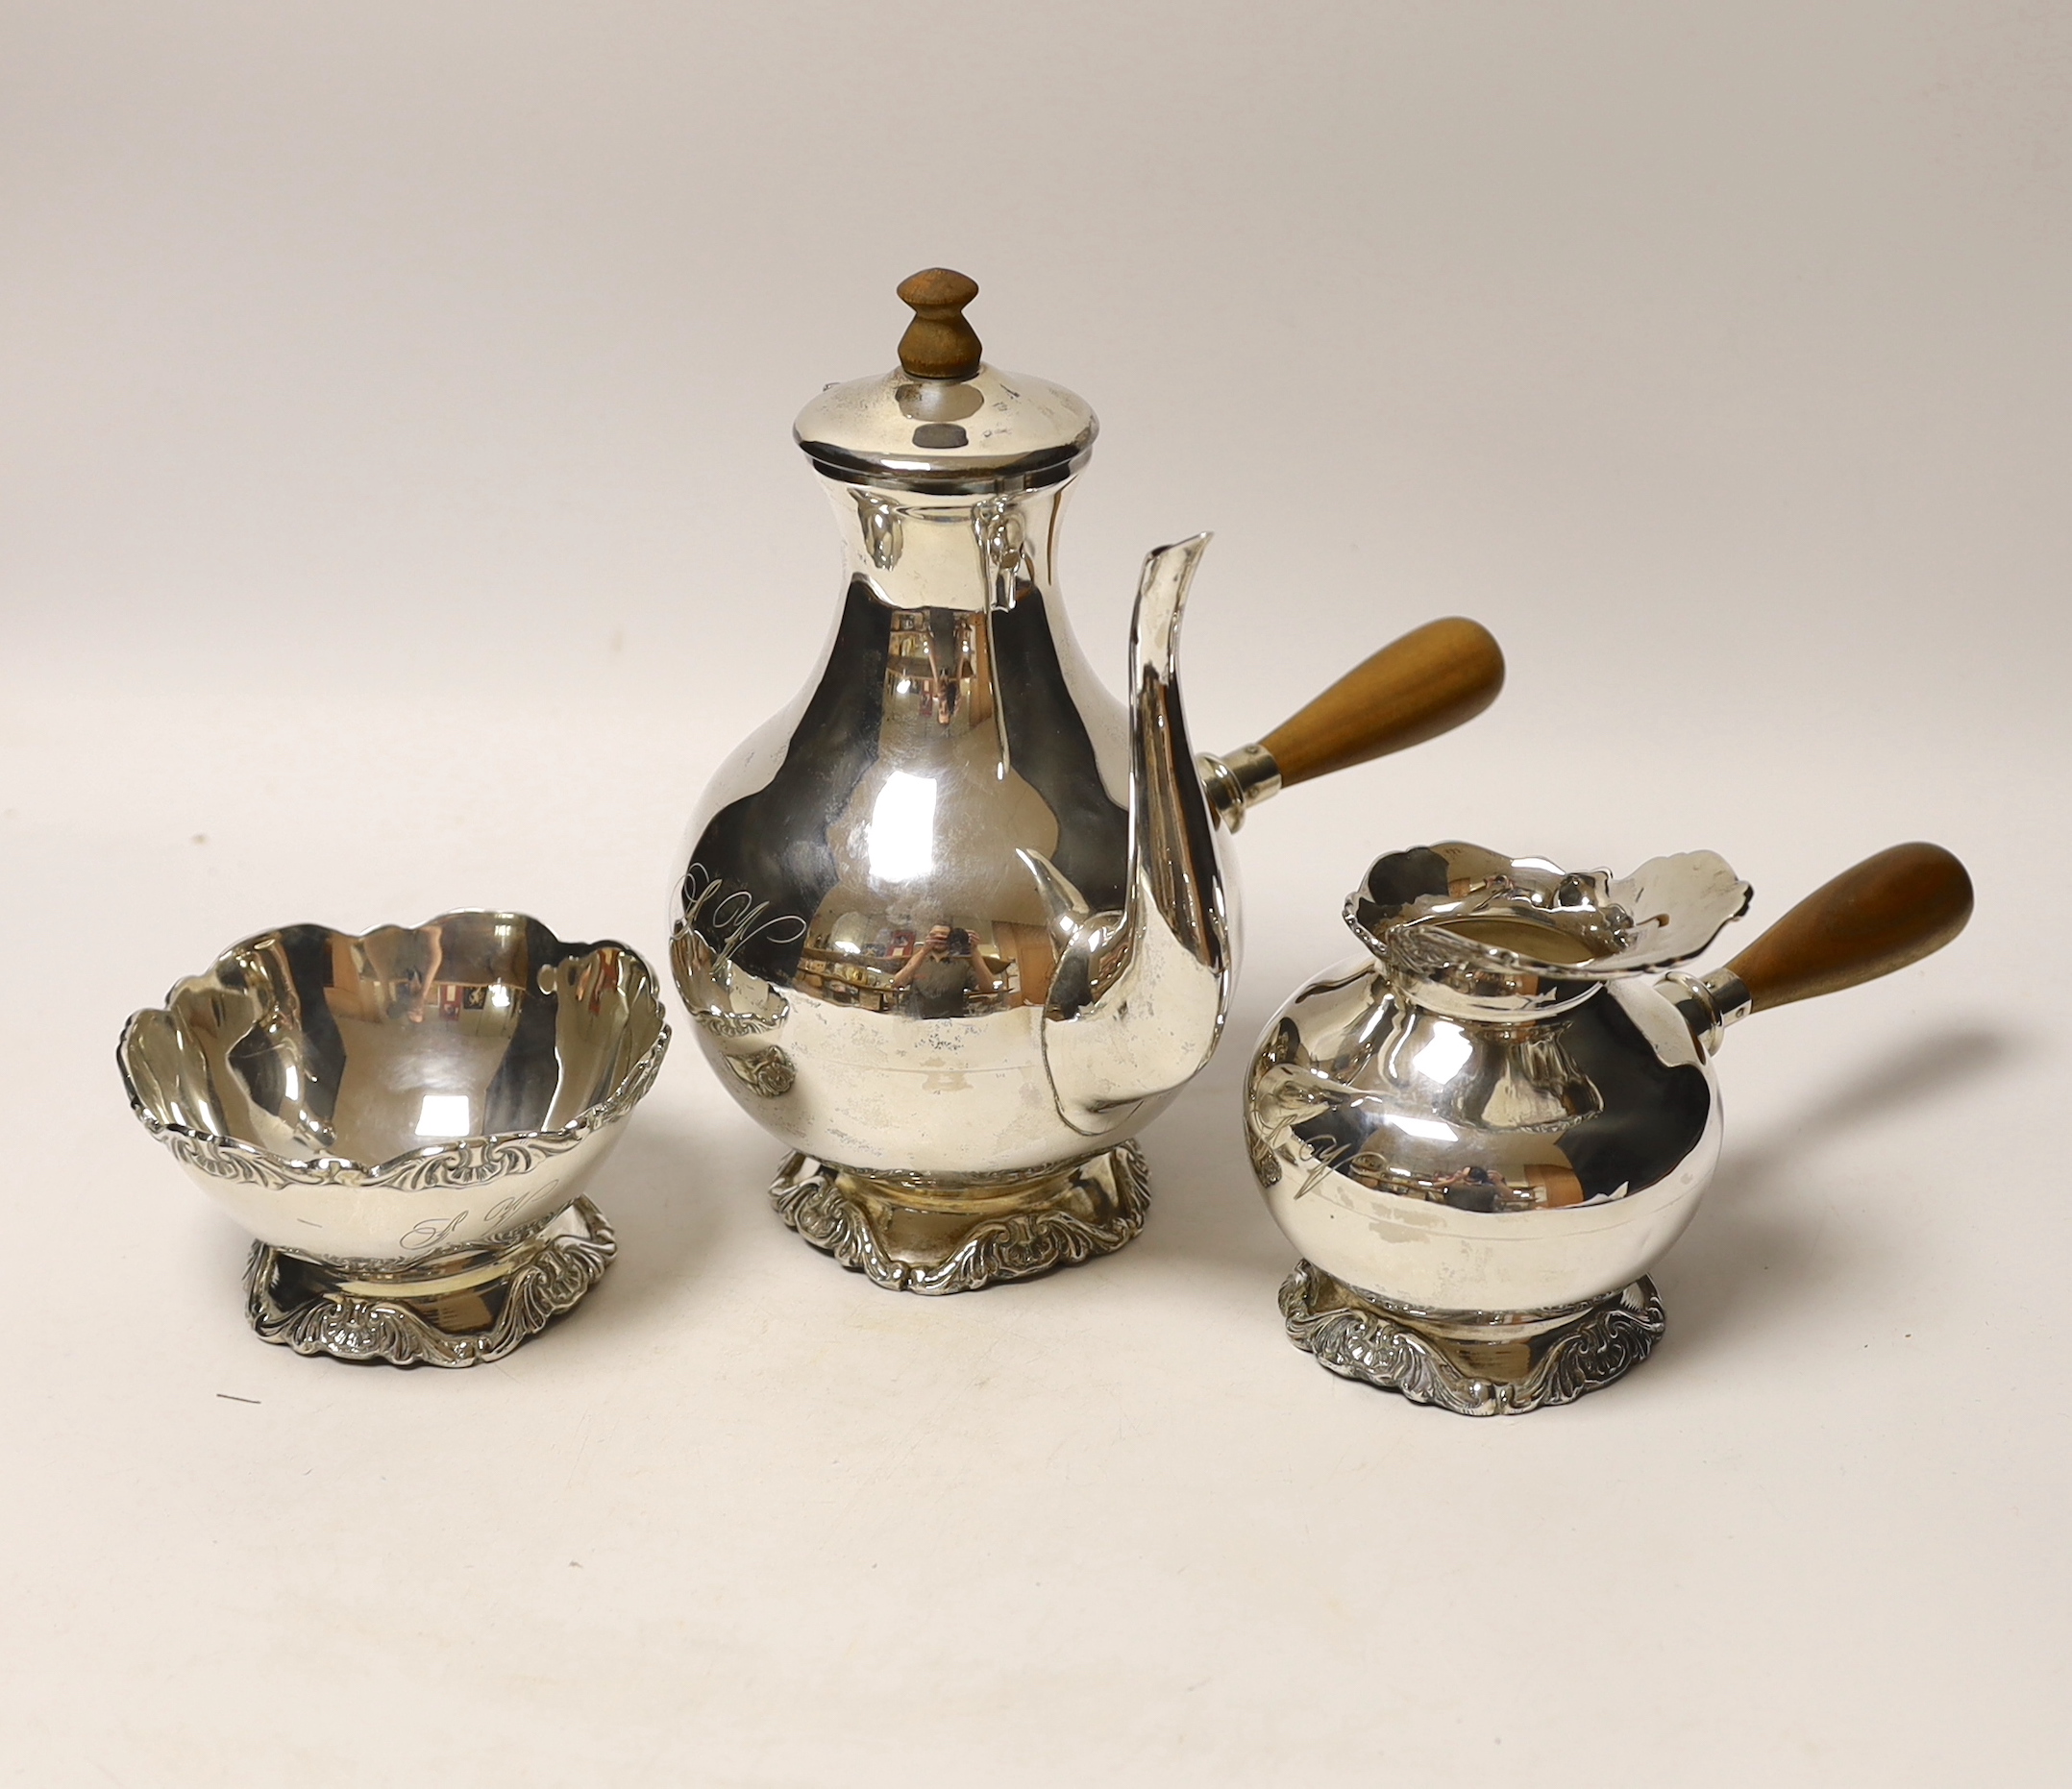 A South American 900 standard white metal three piece coffee set, coffee pot height 21.3cm, gross weight 31.5oz.